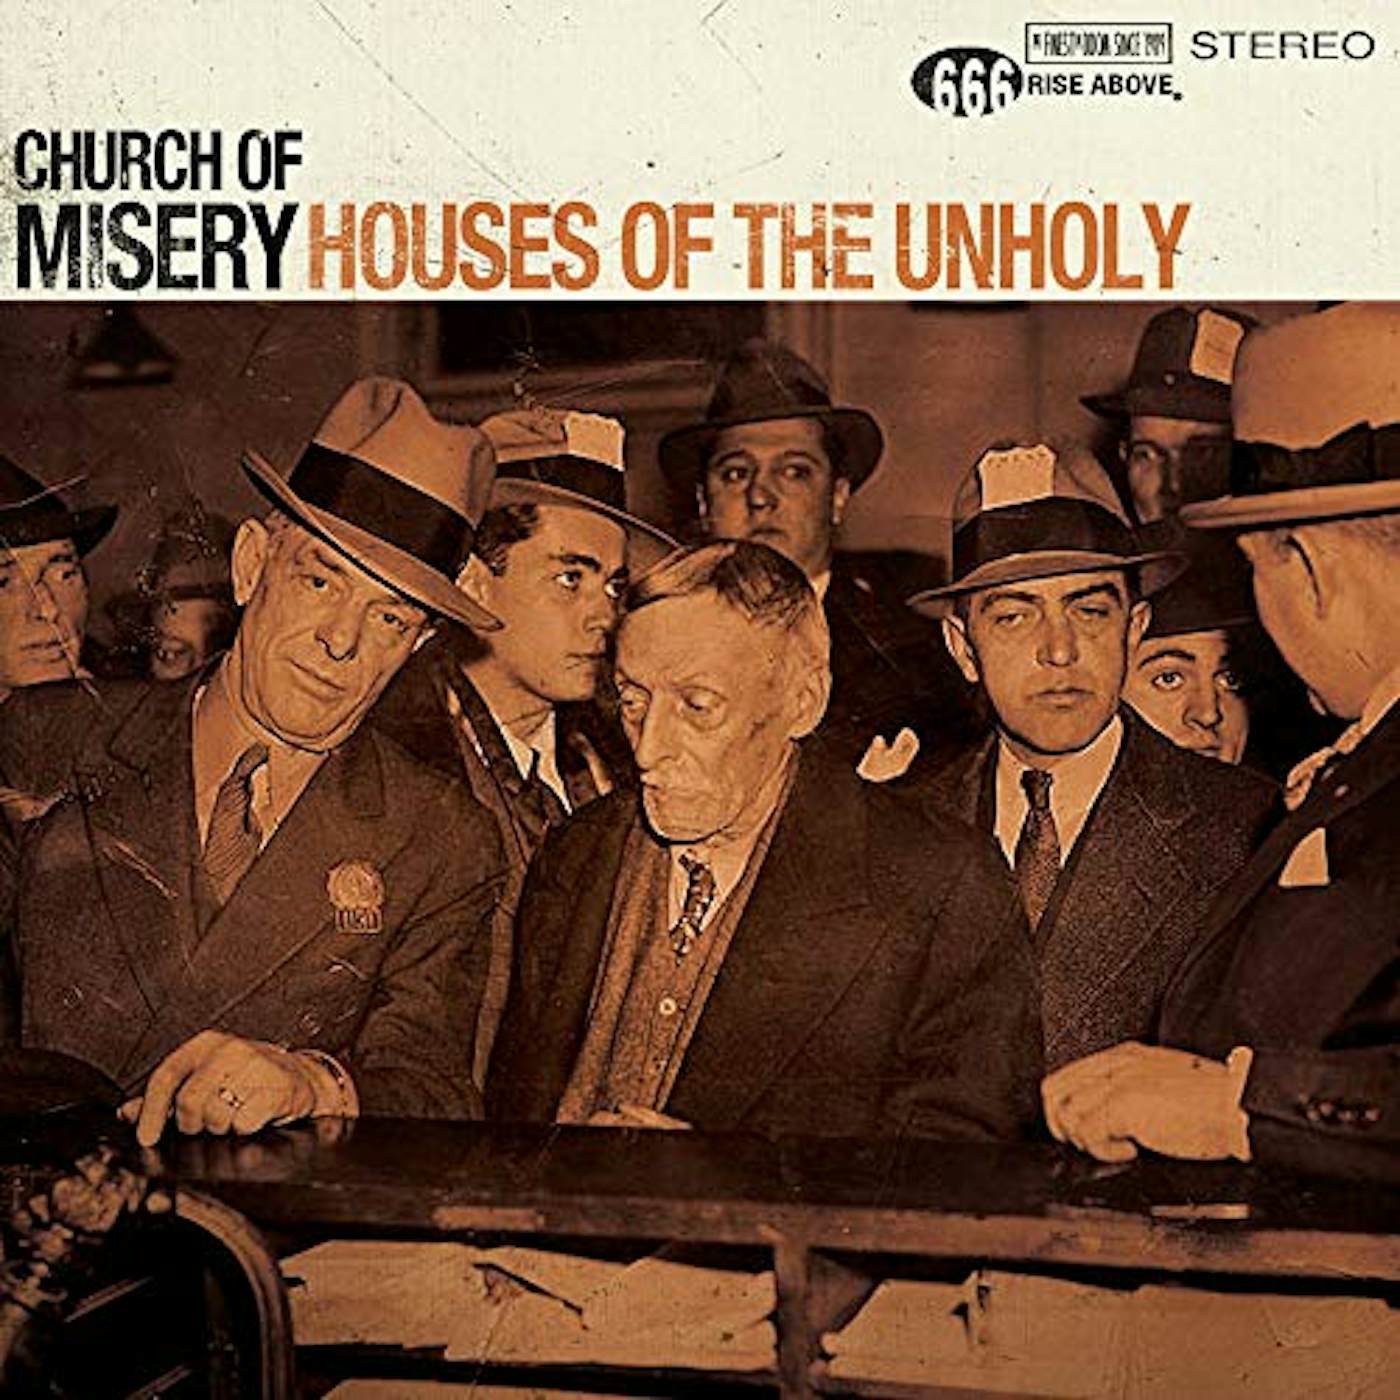 Church Of Misery Houses of the Unholy Vinyl Record